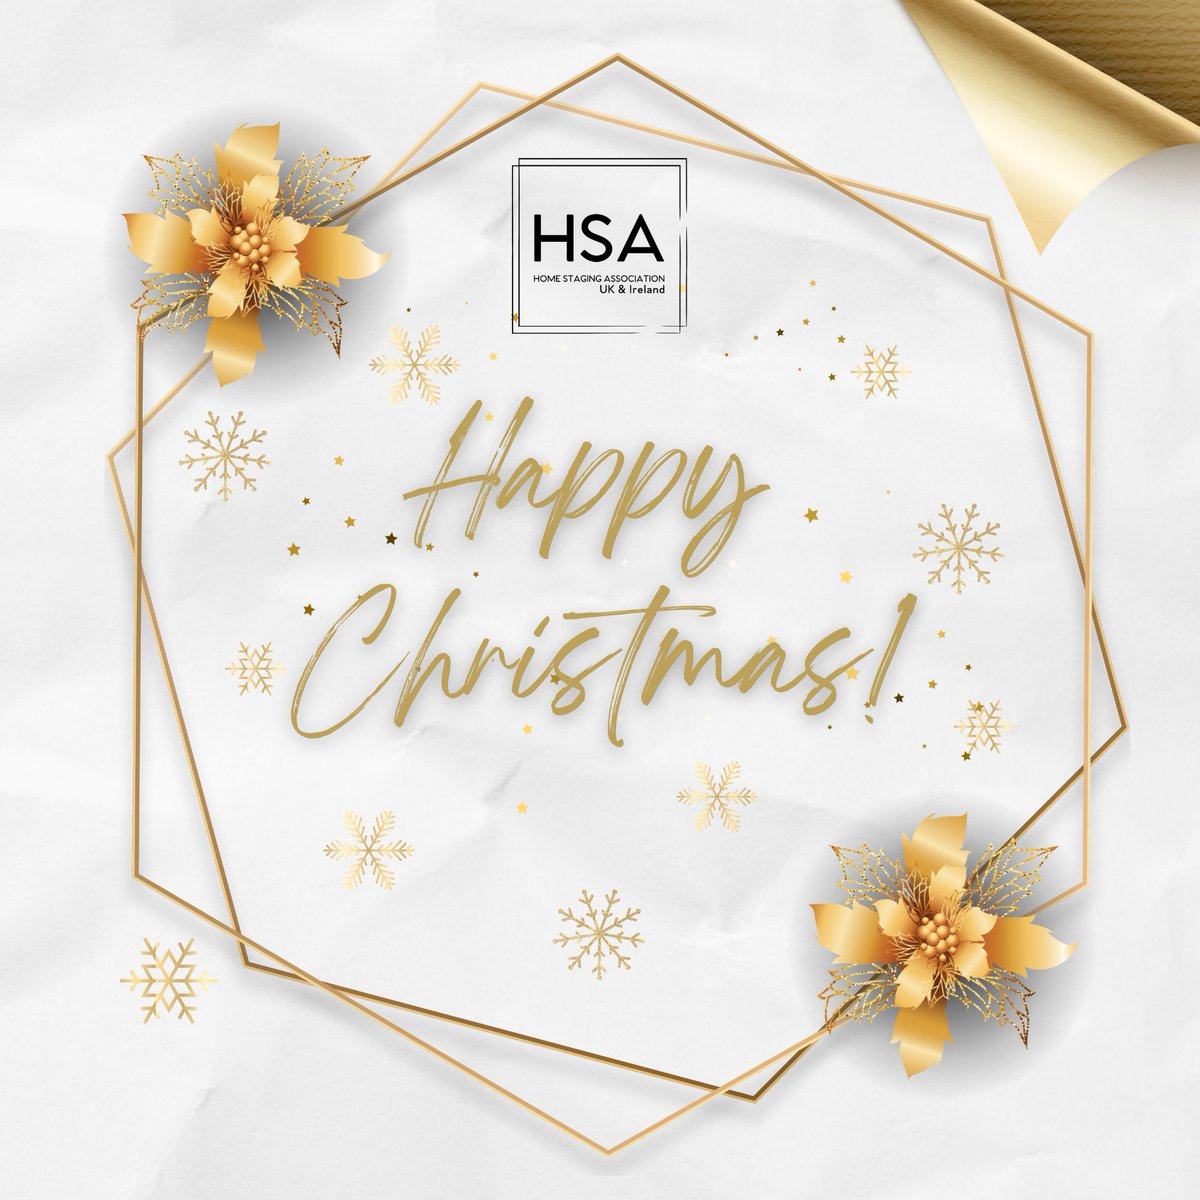 Wishing you a joyous Christmas filled with love, gratitude, and moments that sparkle with warmth.

#homestaging #homestagingassociation #hsauk #festivehomes #holidayhomestage